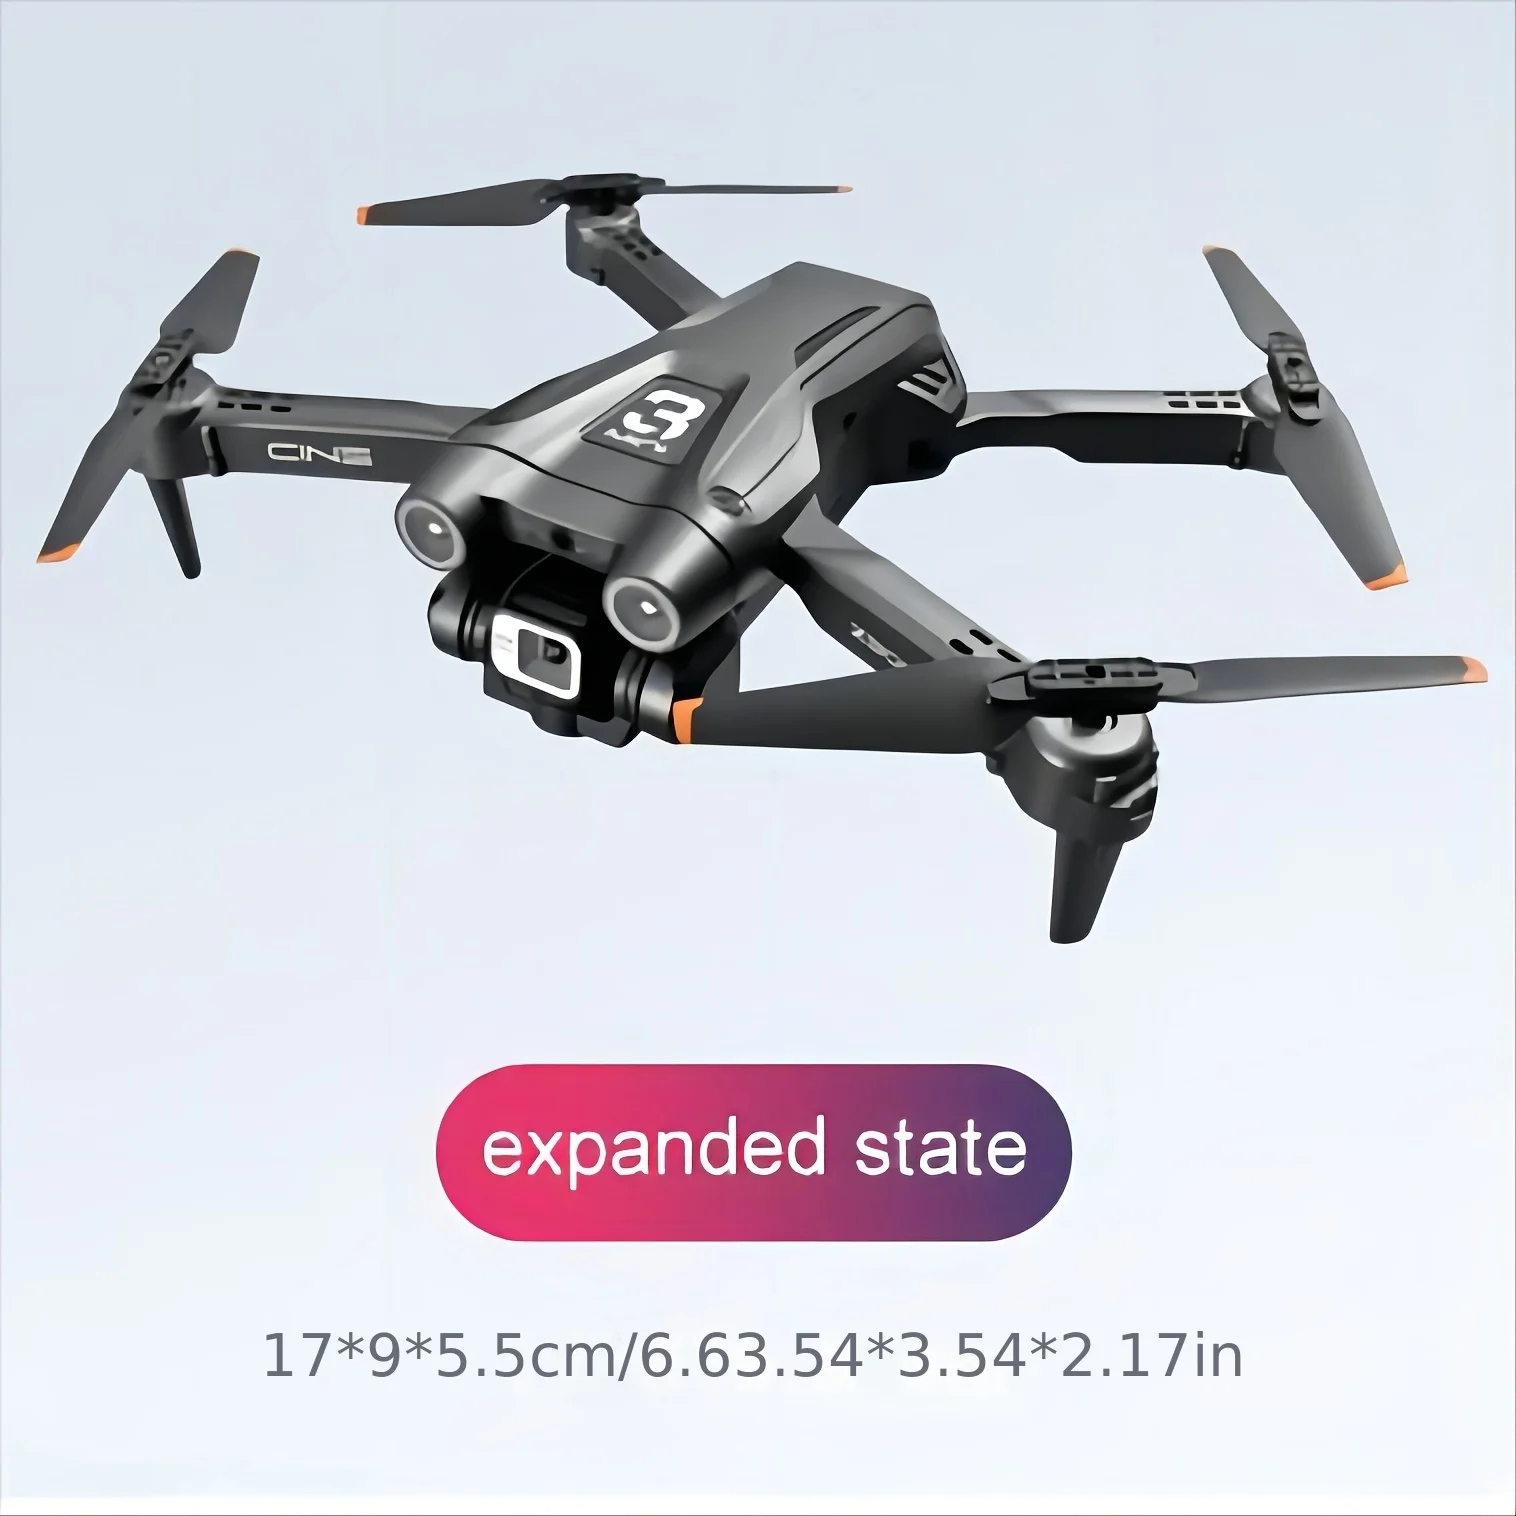 

Ultimate Aerial Drone for Stunning HD Photography- Dual Cameras, Optical Flow Positioning, Obstacle Avoidance, Remote Controlled